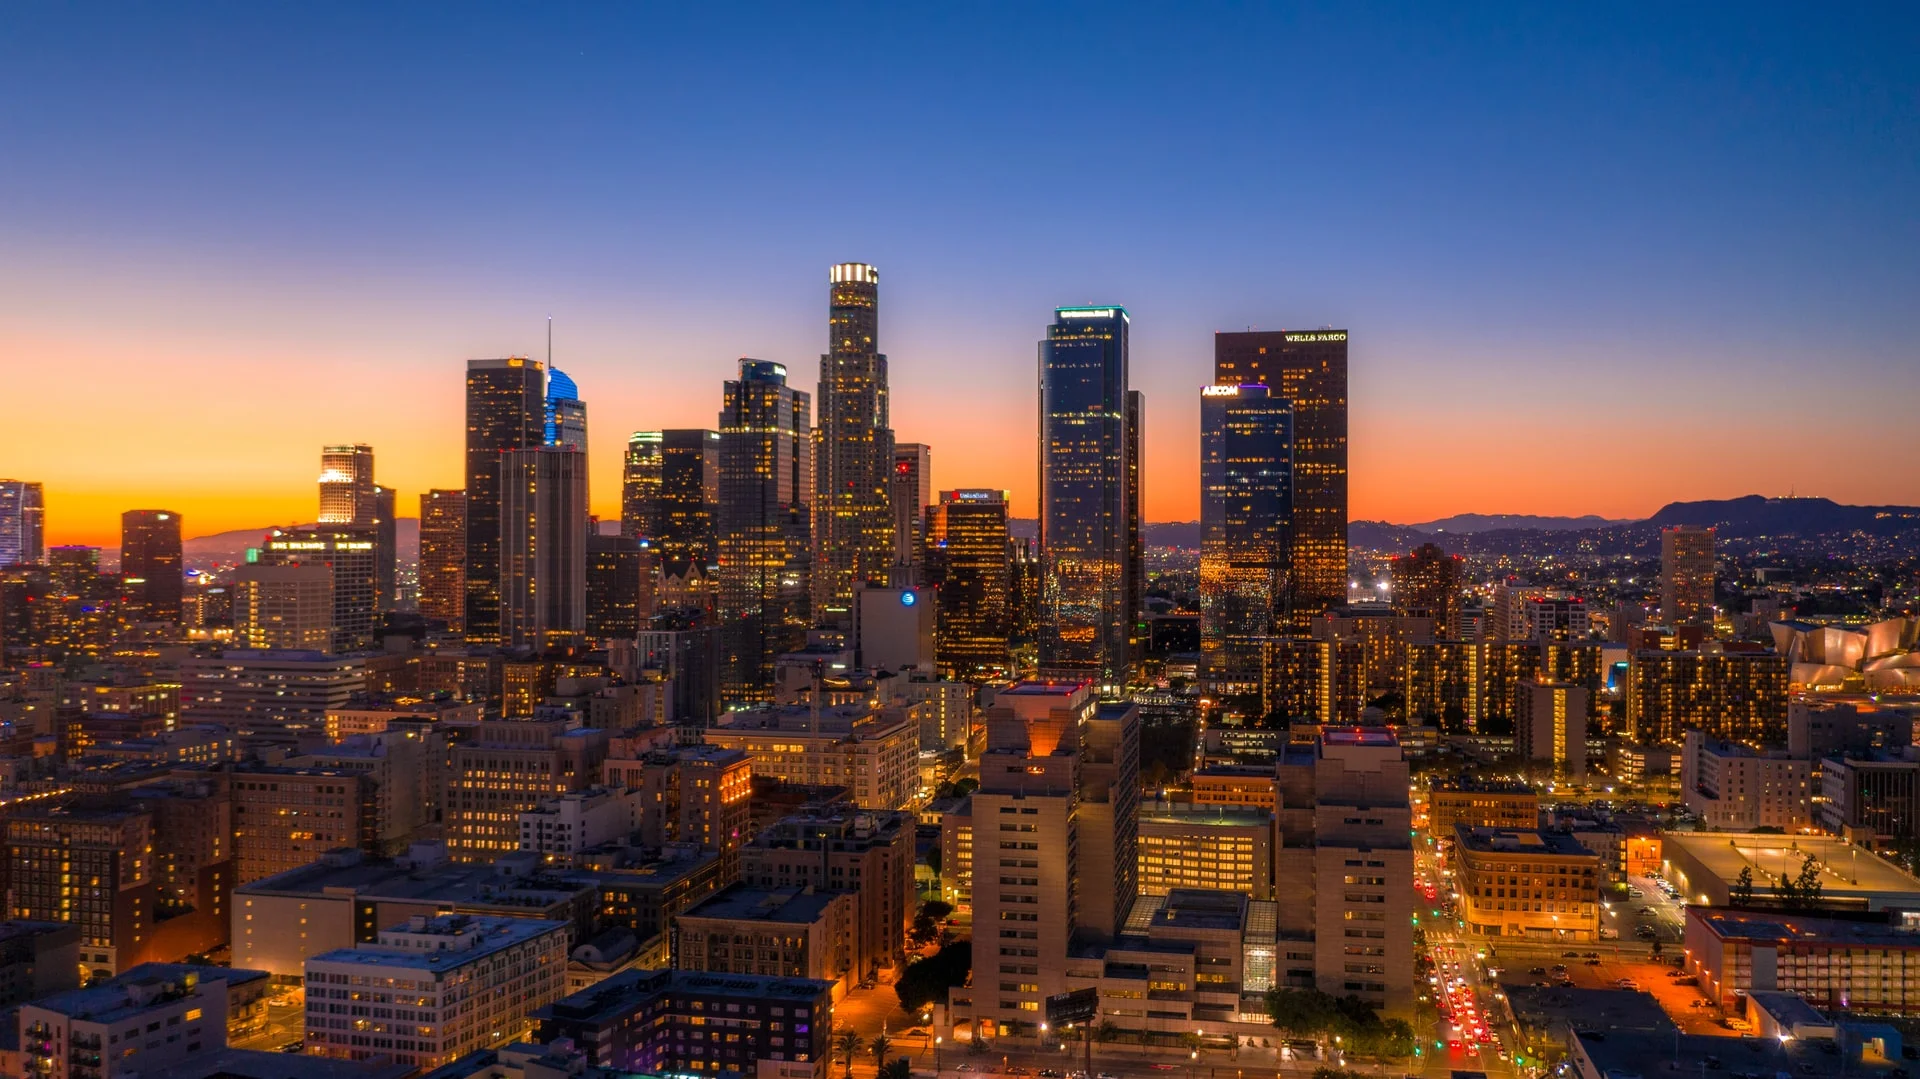 Los Angeles Tourism to woo Indian travellers at SATTE 2022